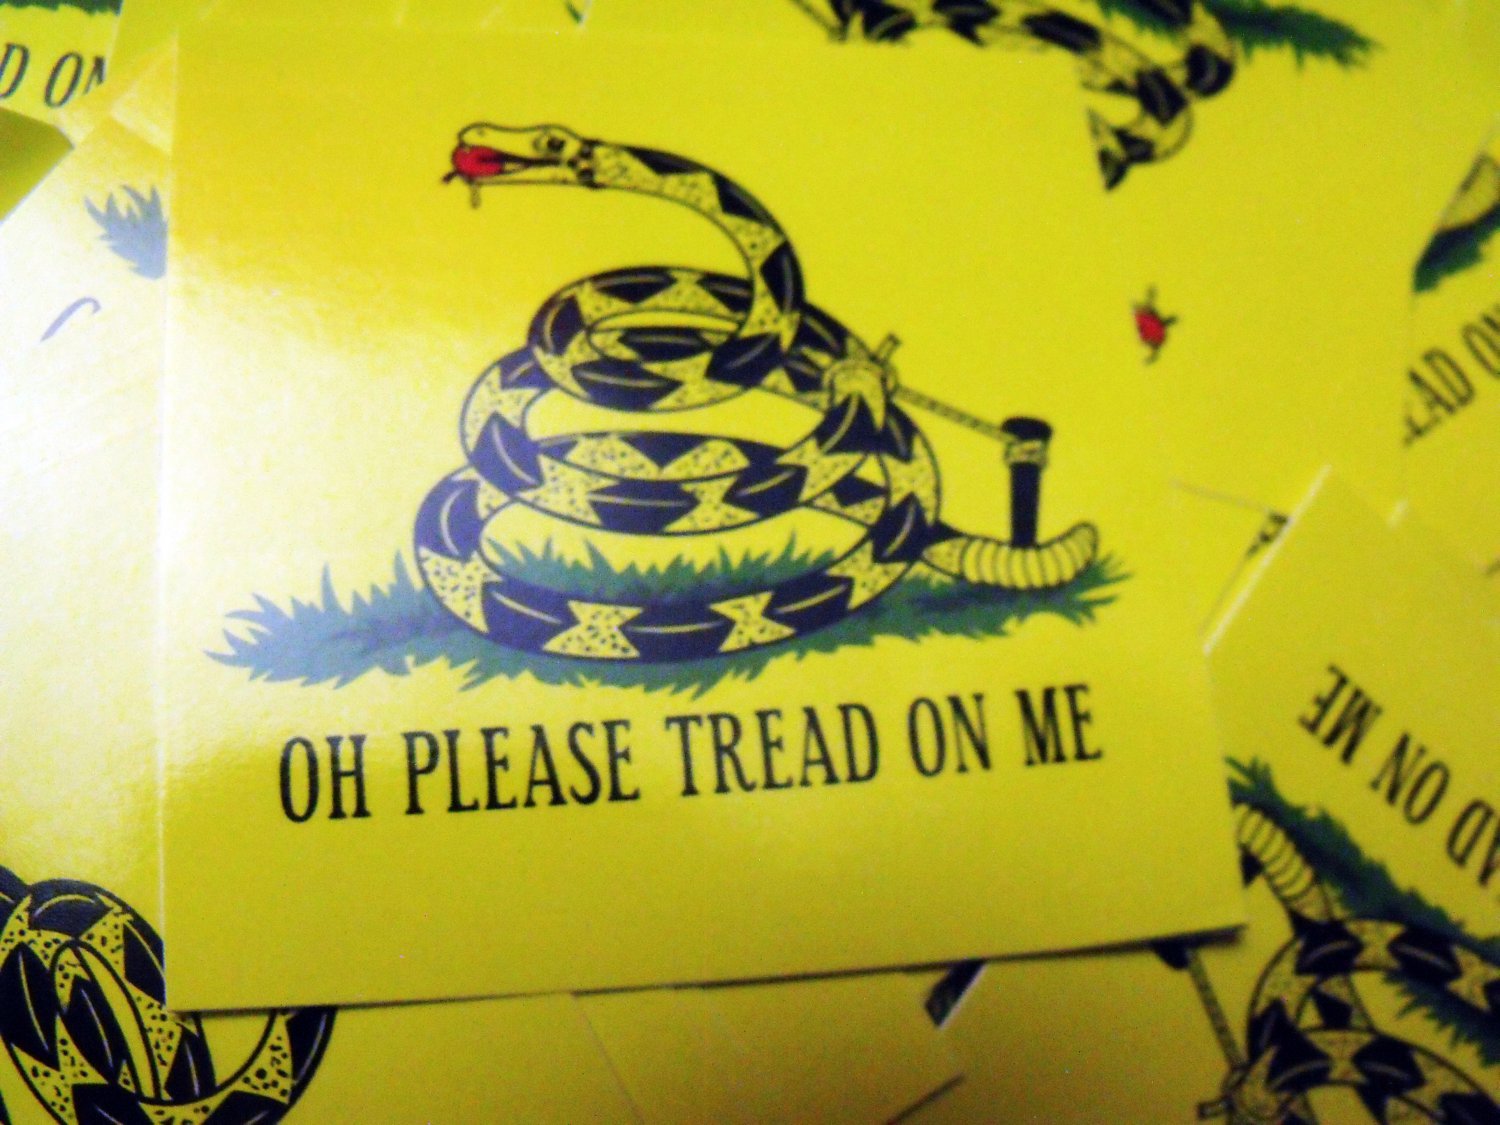 100 OH PLeASE TReAD ON ME 2.5" x 2.5" stickers